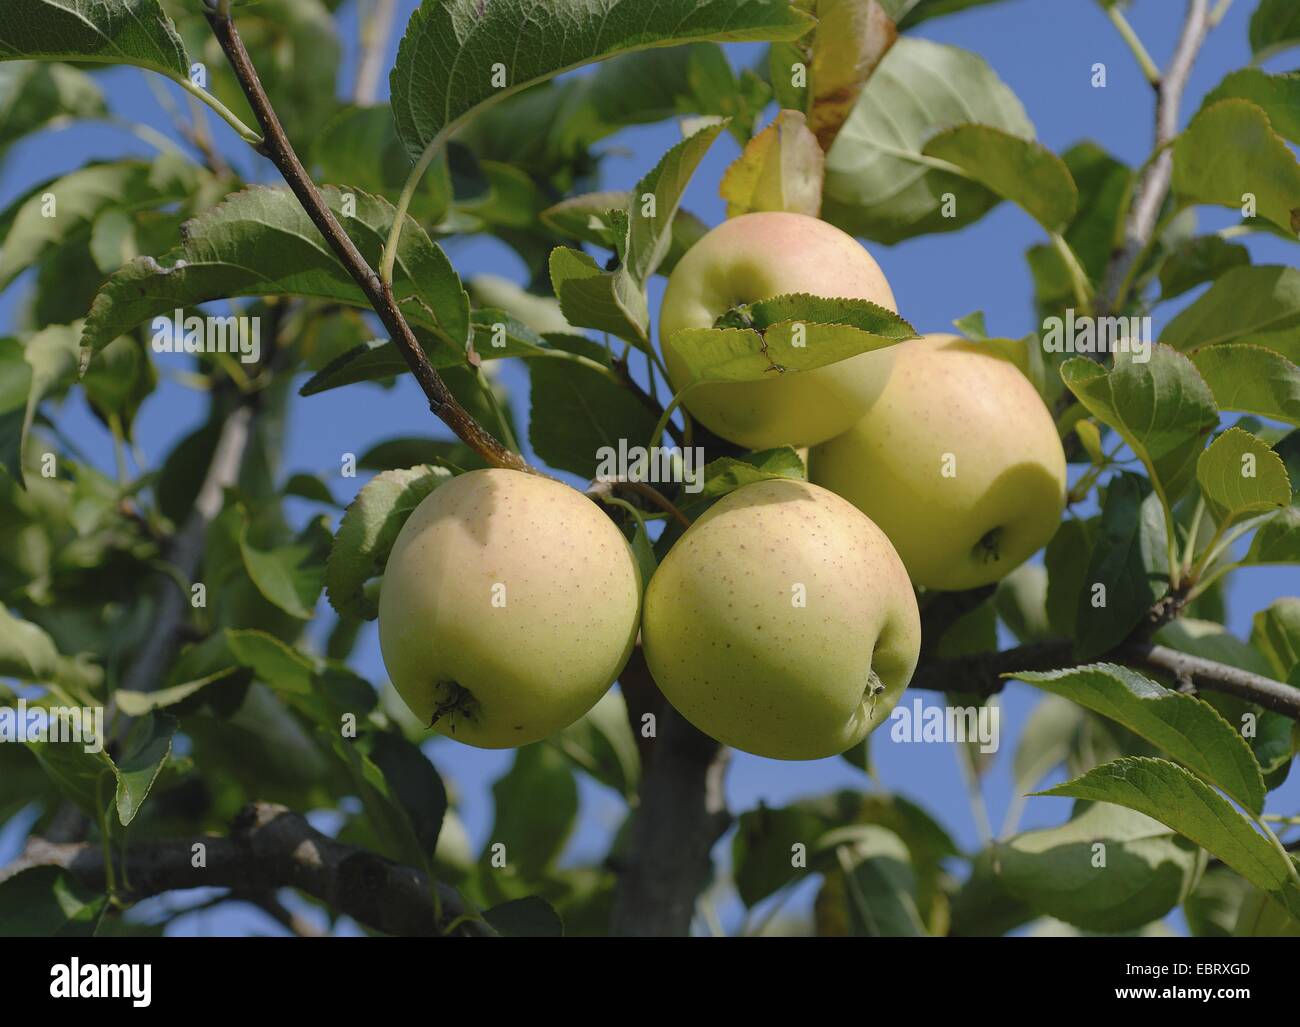 hi-res stock and - photography malus Alamy tree golden images domestica Apple